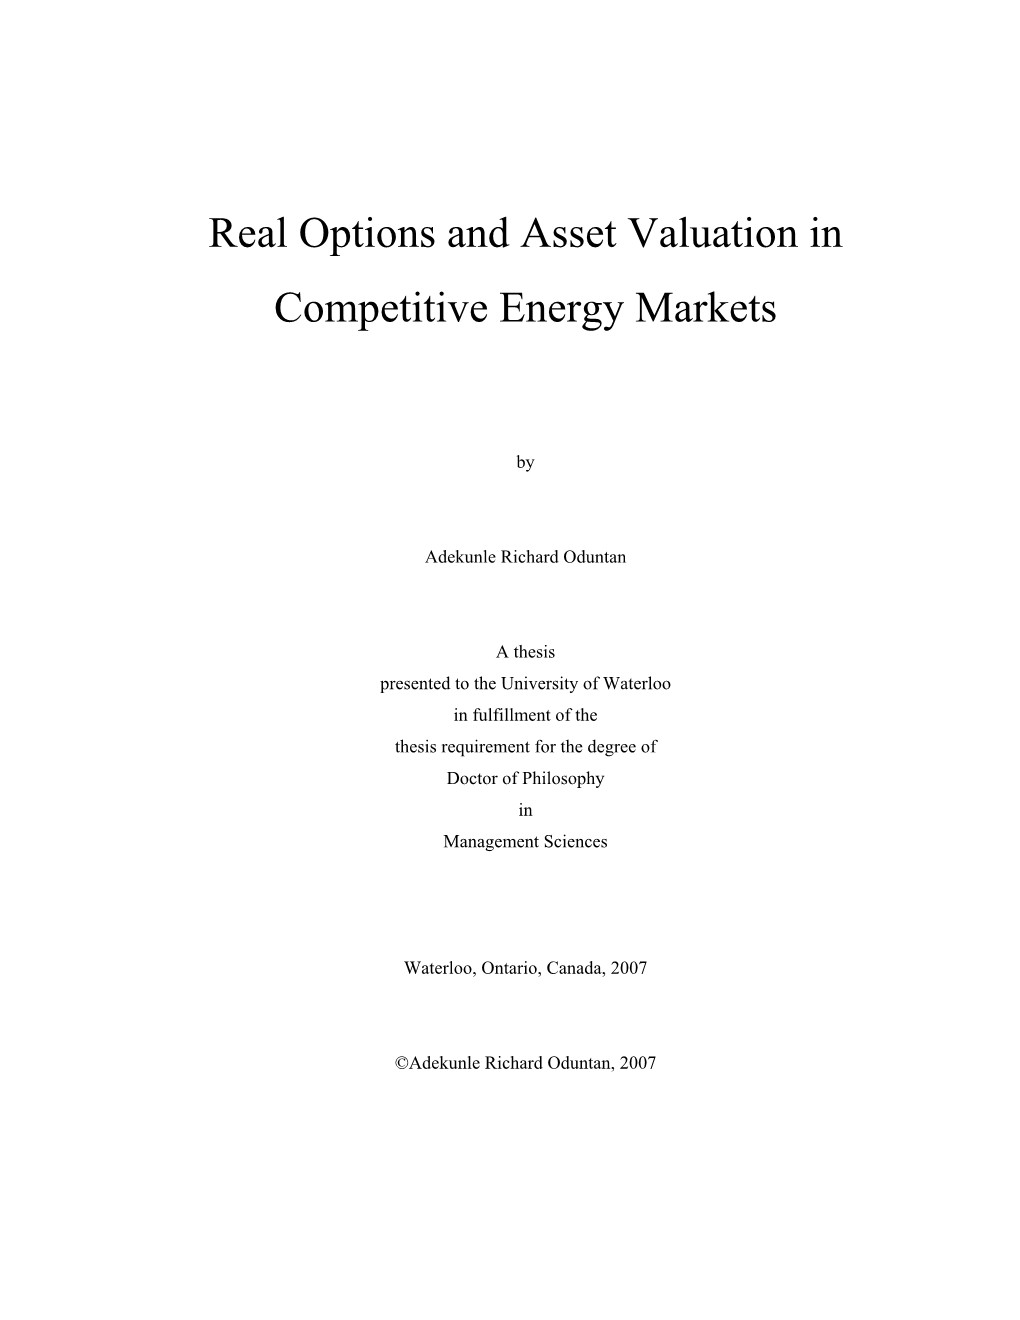 Real Options and Asset Valuation in Competitive Energy Markets